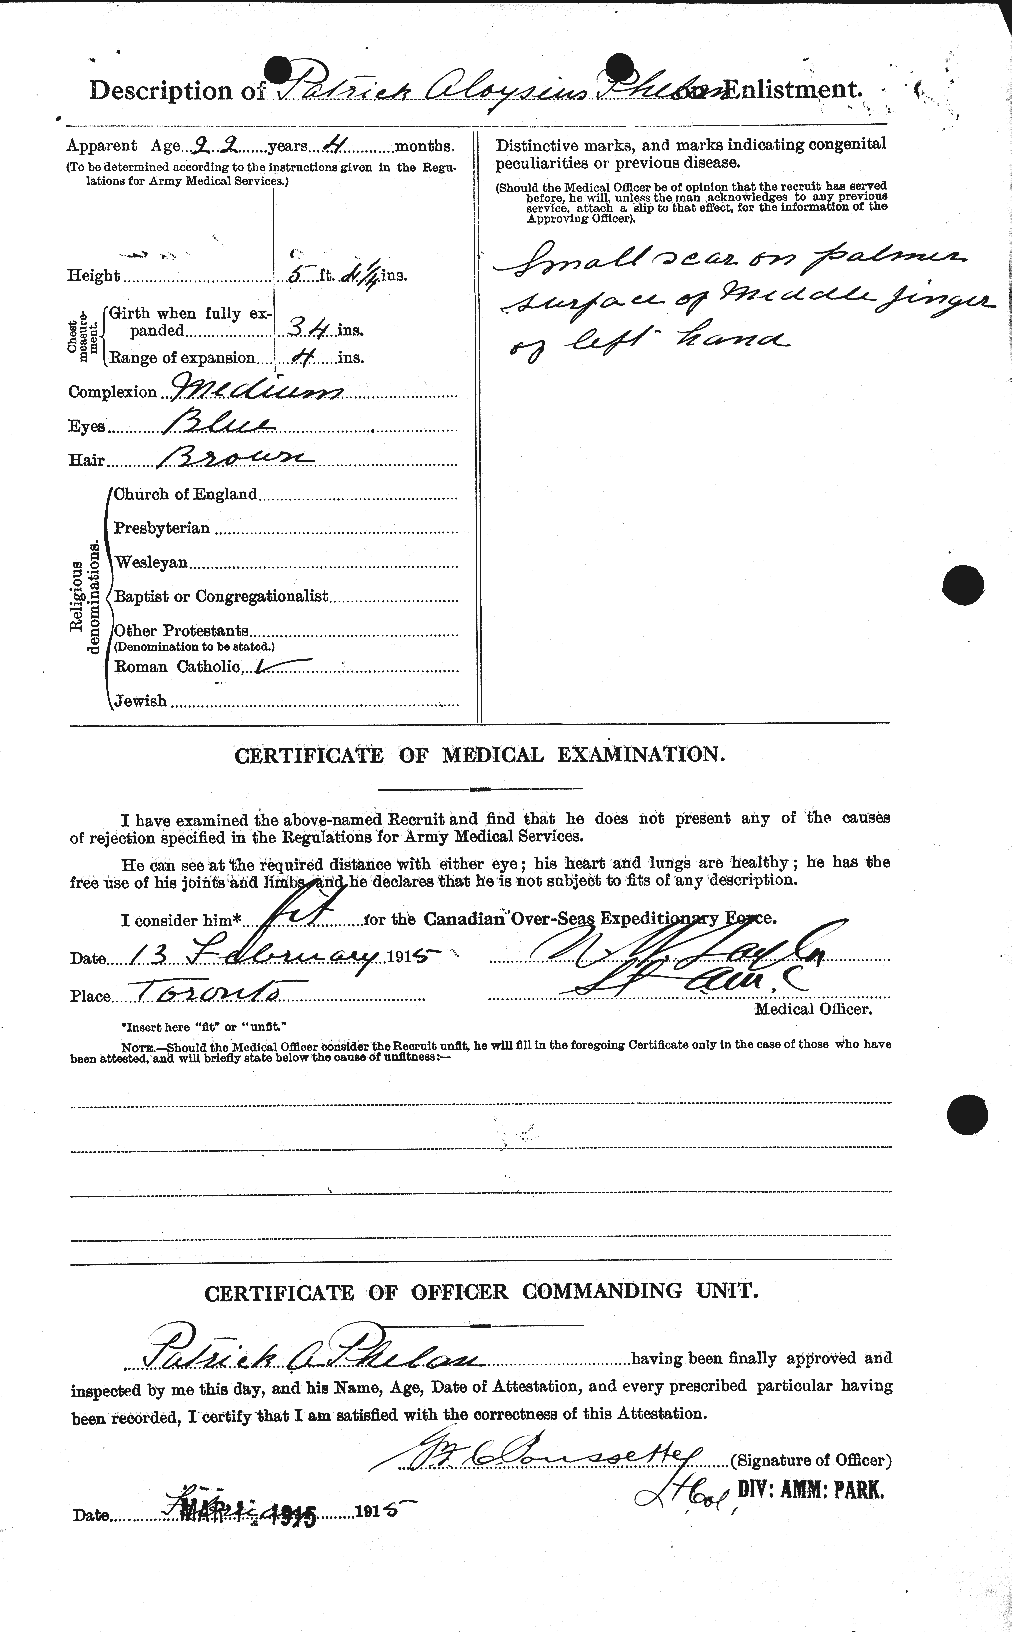 Personnel Records of the First World War - CEF 576963b